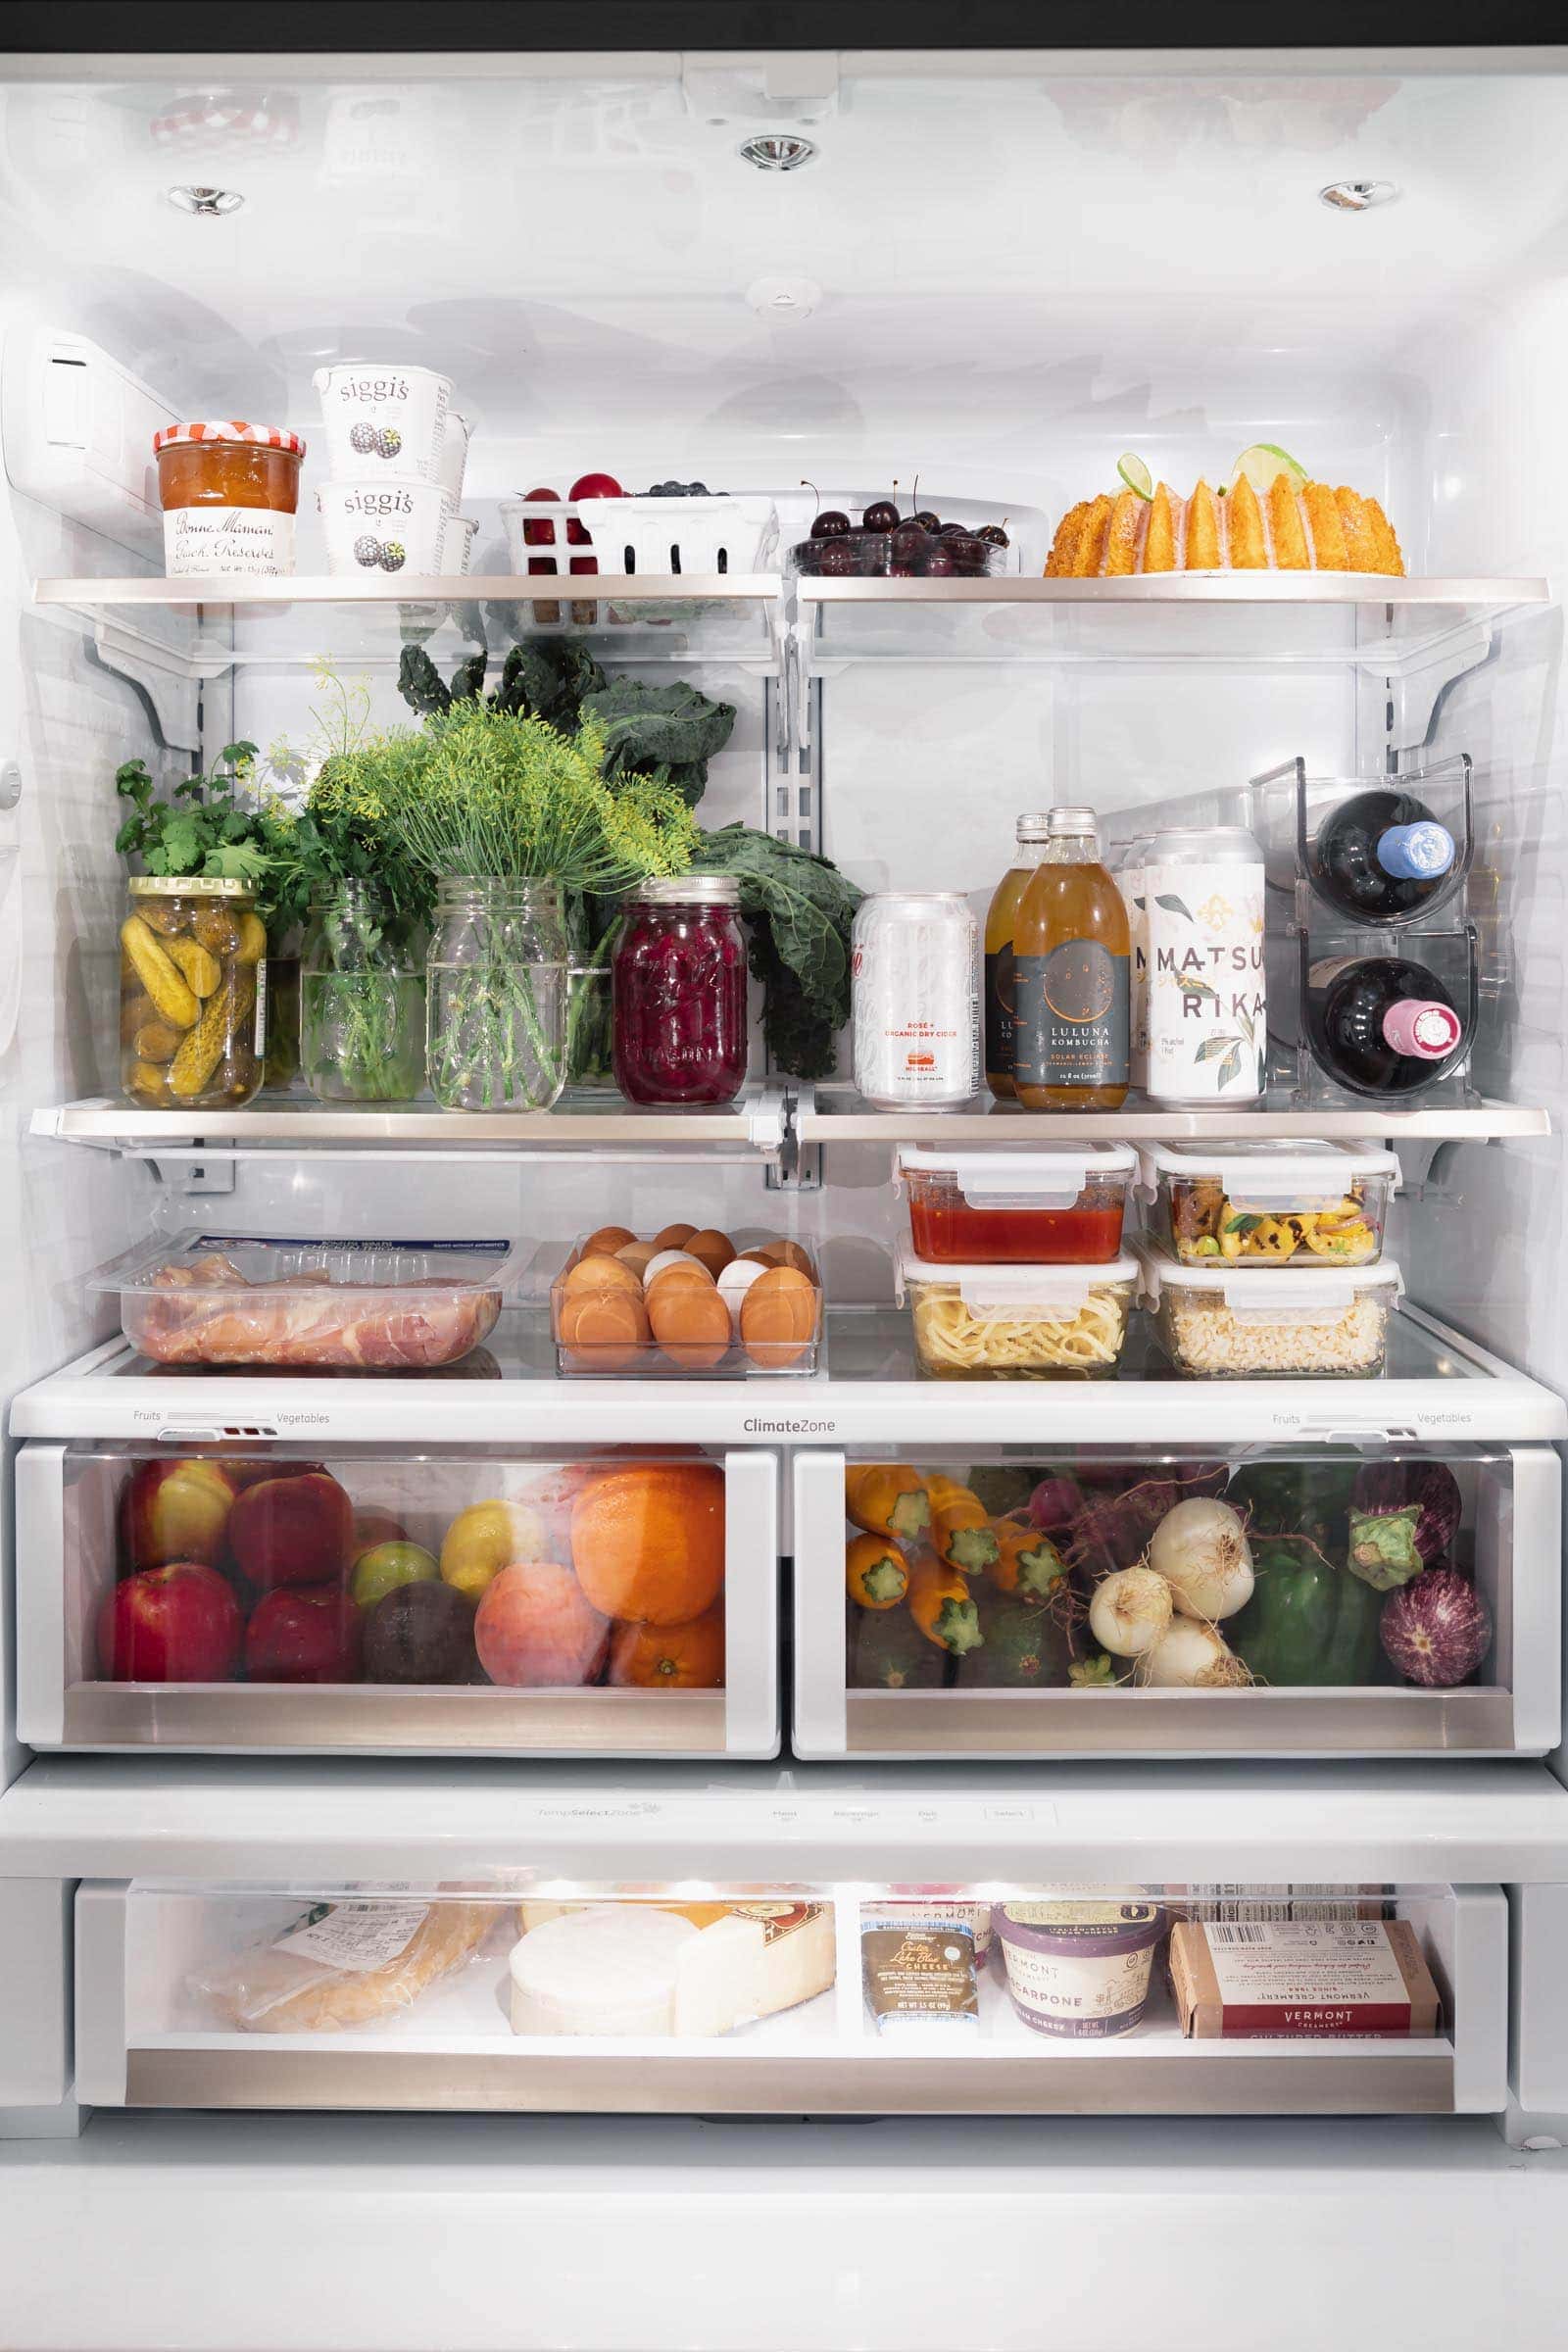 How To Organize Your Fridge The, How To Put Fridge Shelves Back In